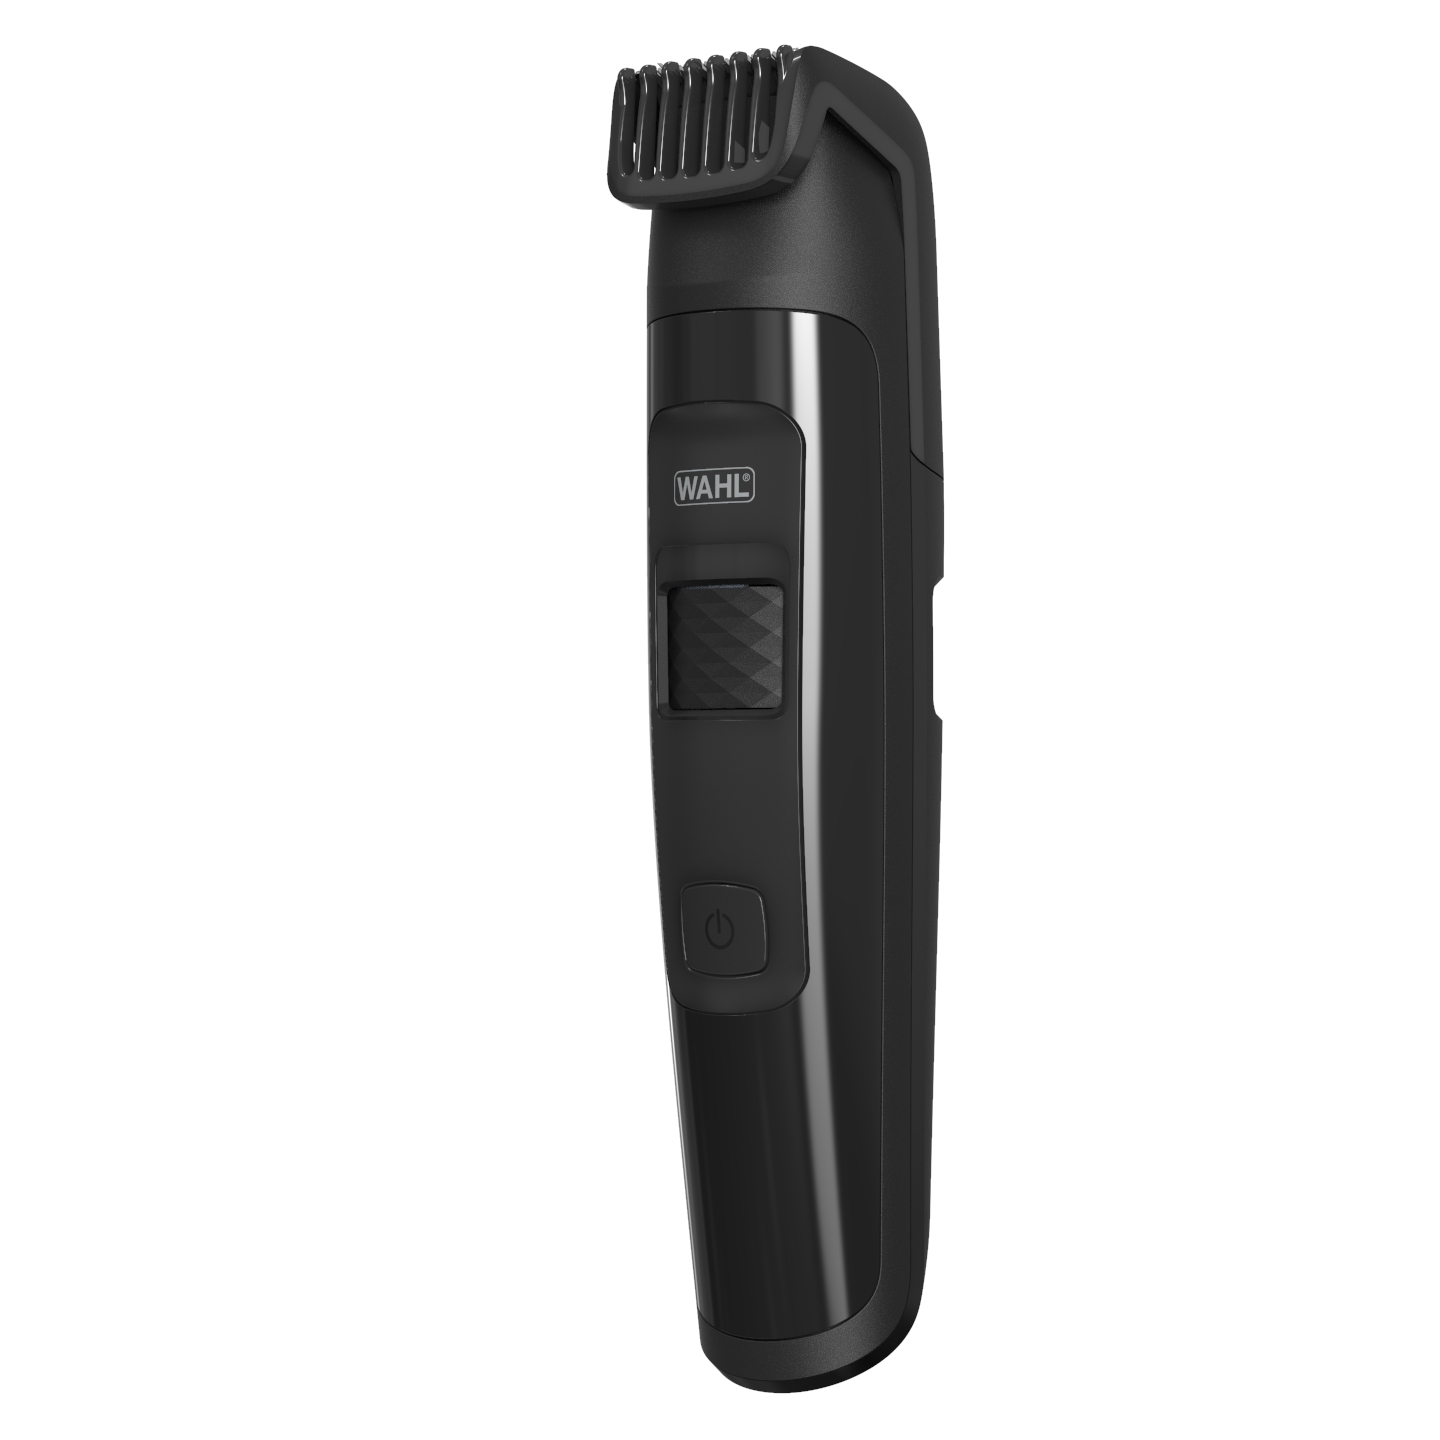 philips hair trimmer accessories